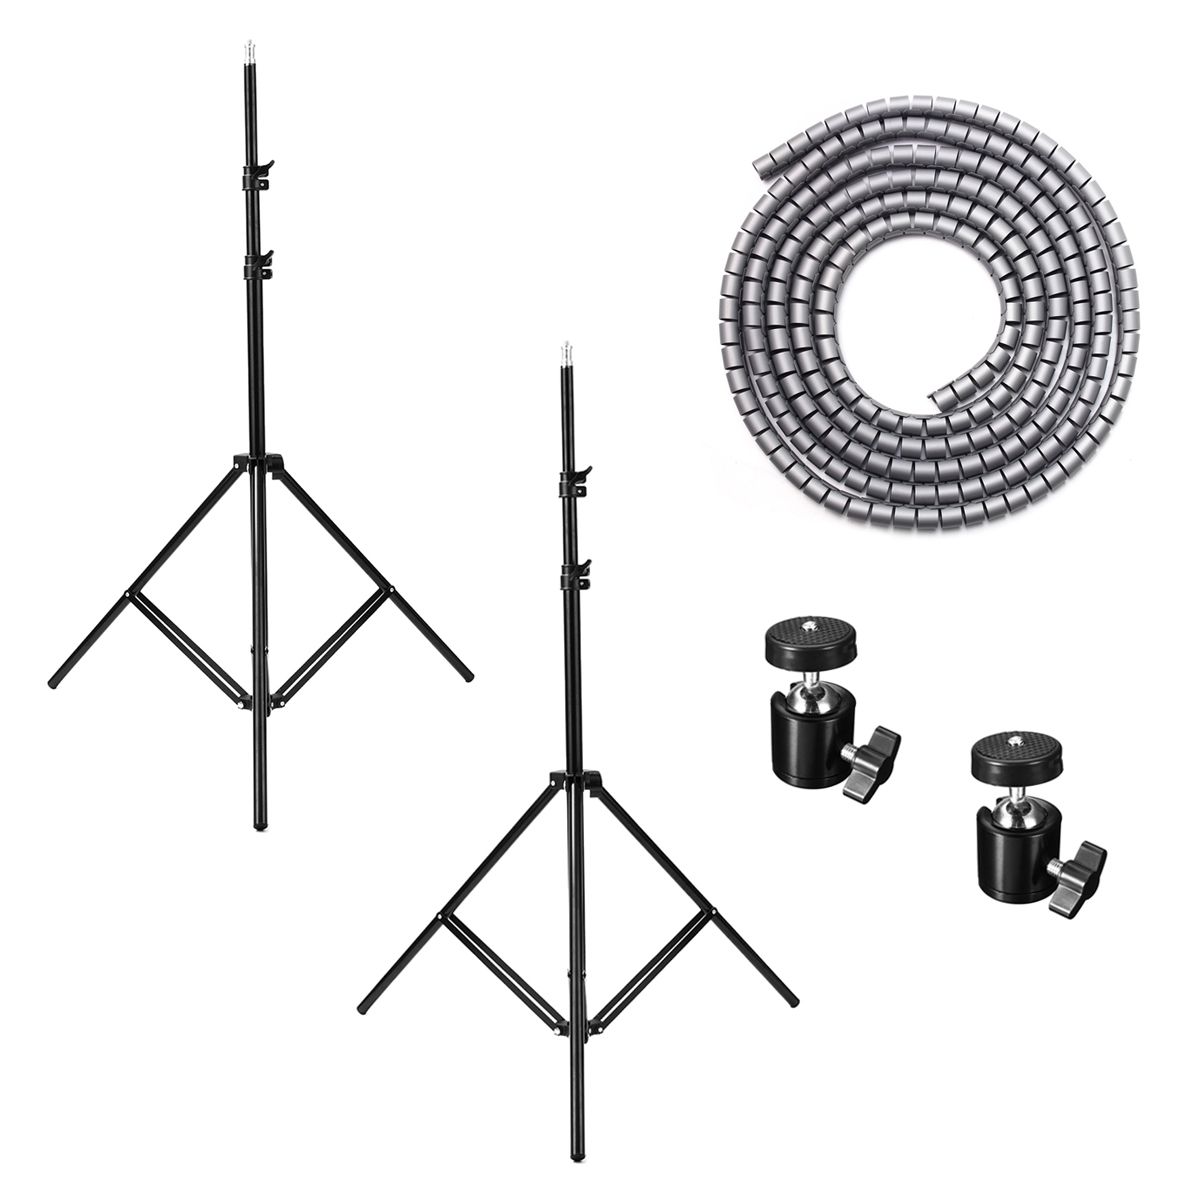 A-Pair-2M-7ft-Adjustable-Video-Ring-Light-Umbrella-Lighting-Tripod-Stand-Holder-with-5M-Strap-1564873